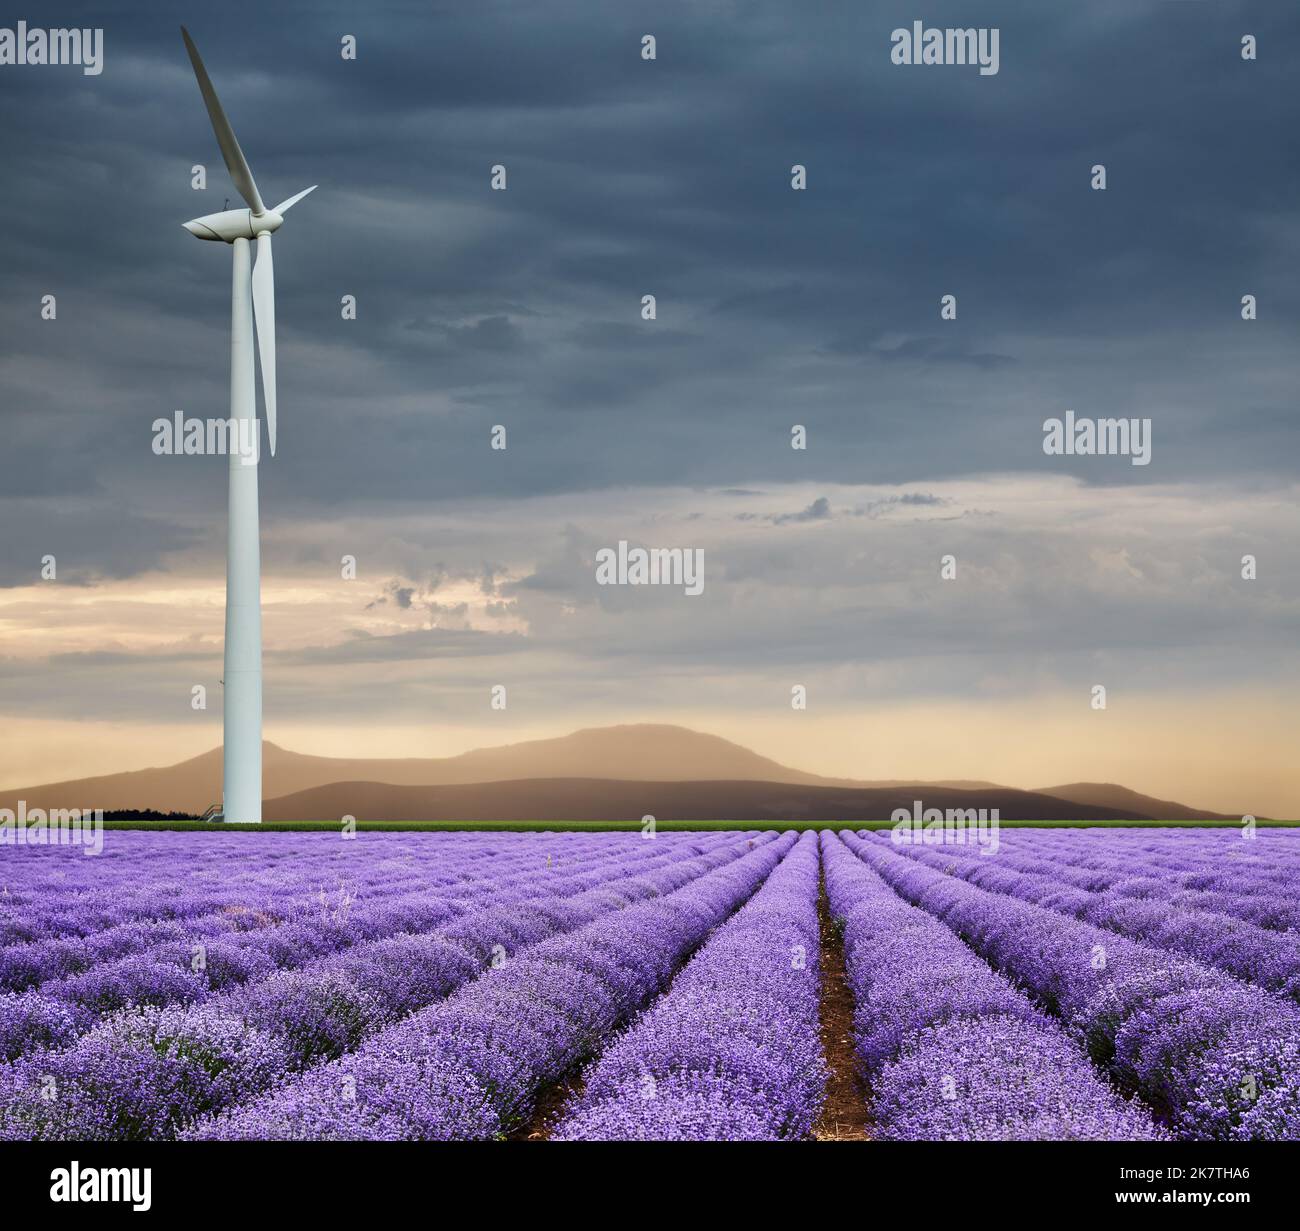 Beautiful blooming lavender field and wind turbine against cloudy sky at sunset Stock Photo